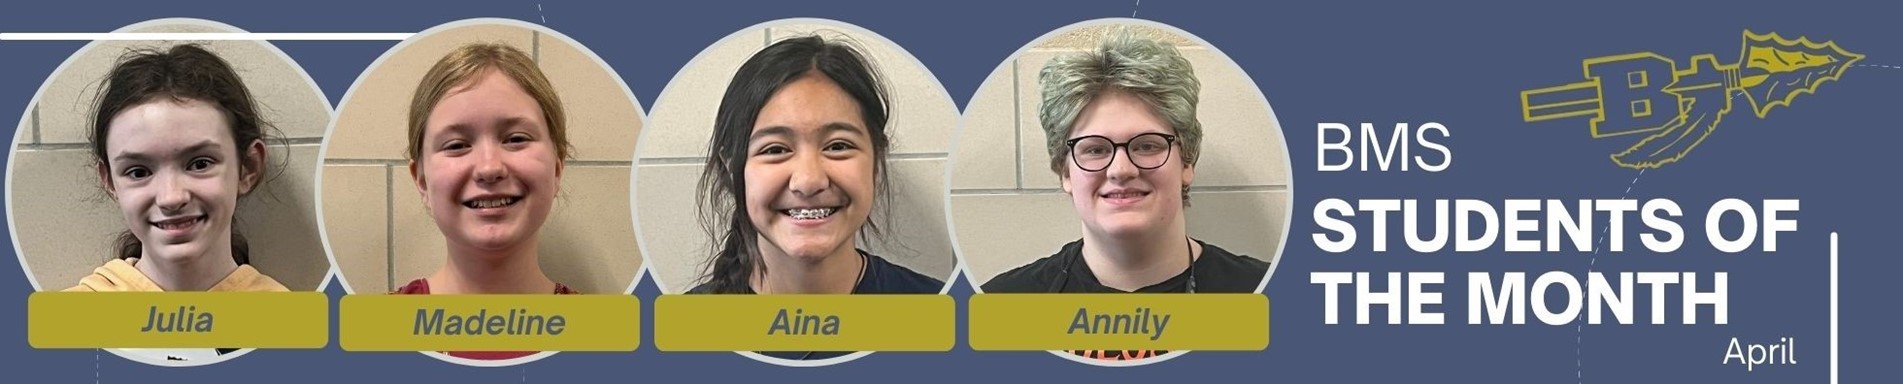 BMS Students of the Month - April